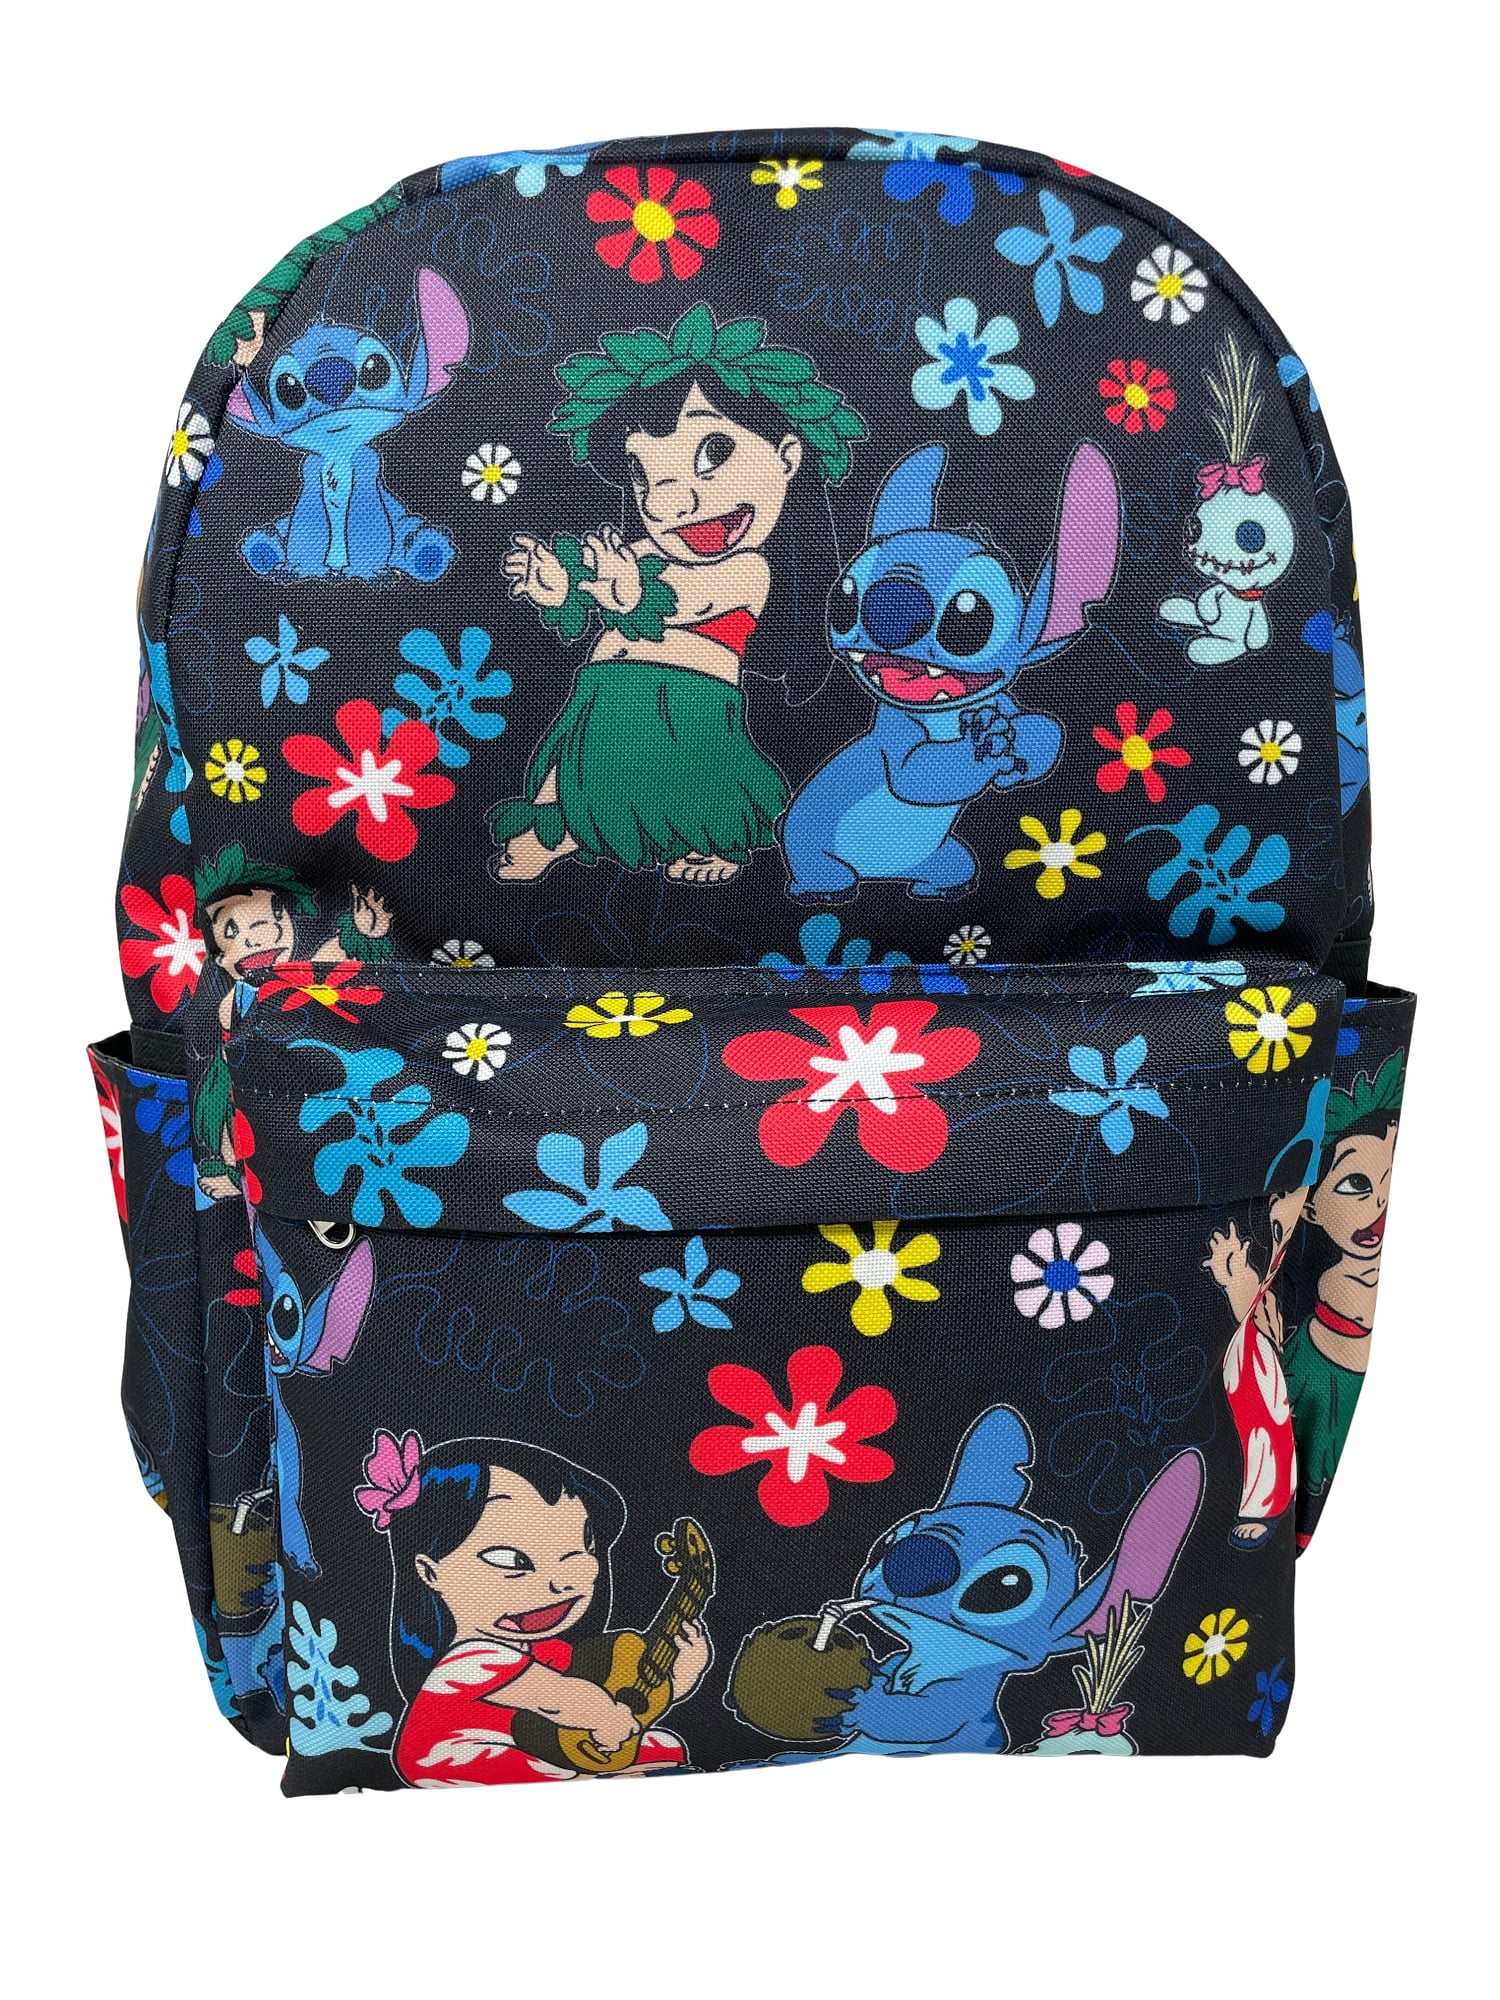 Lilo and Stitch 16 Inch Allover Print Laptop Backpack Black 